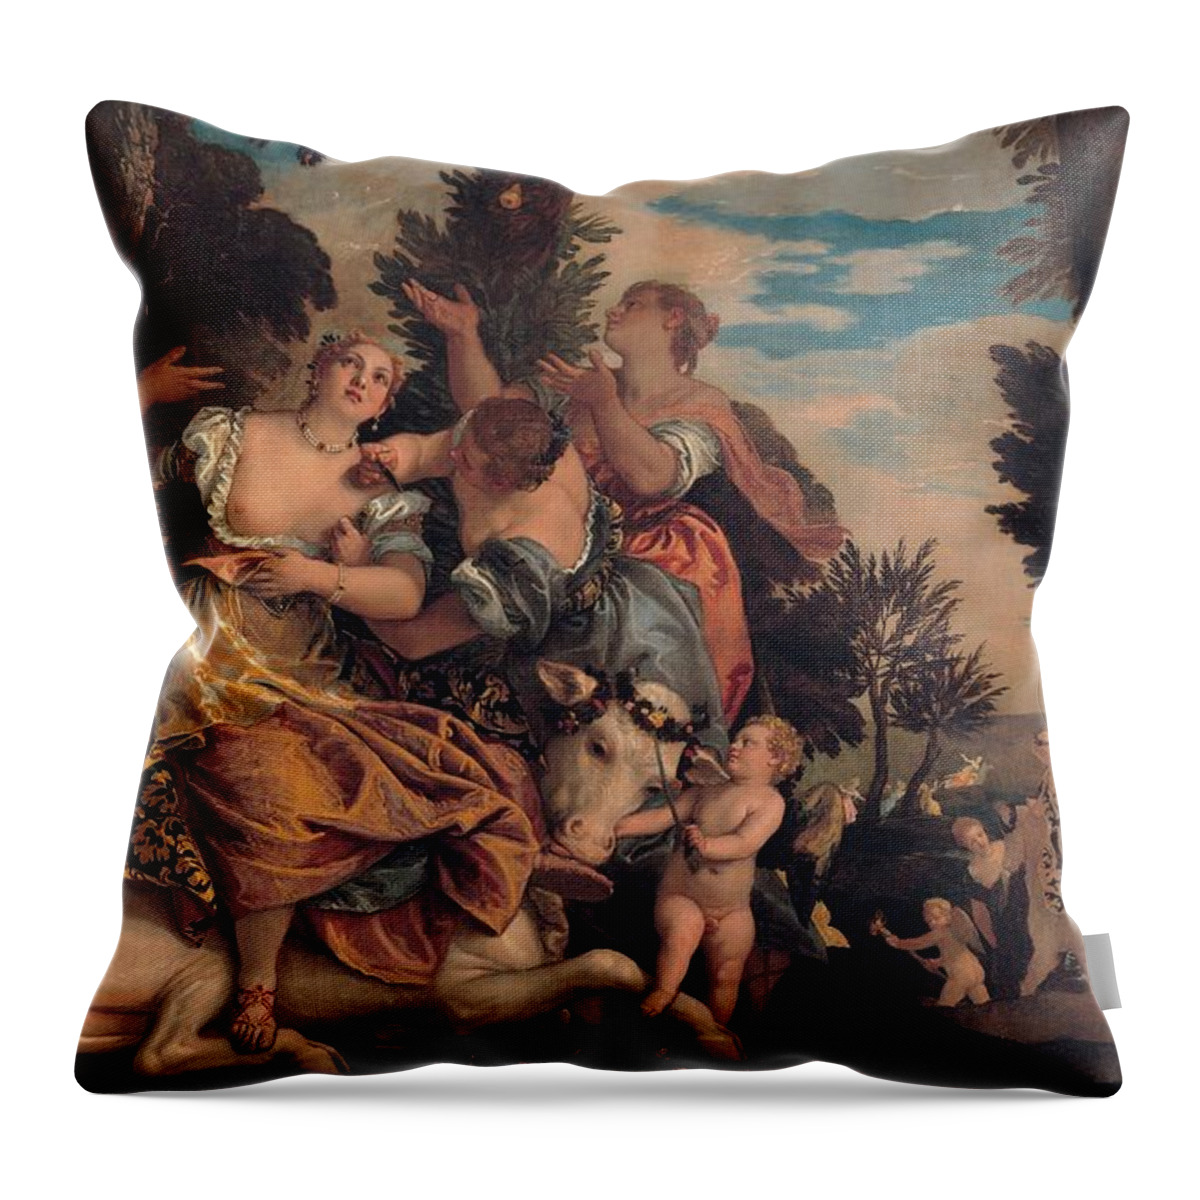 1581-1584 Throw Pillow featuring the painting Rape of Europa by Paolo Veronese